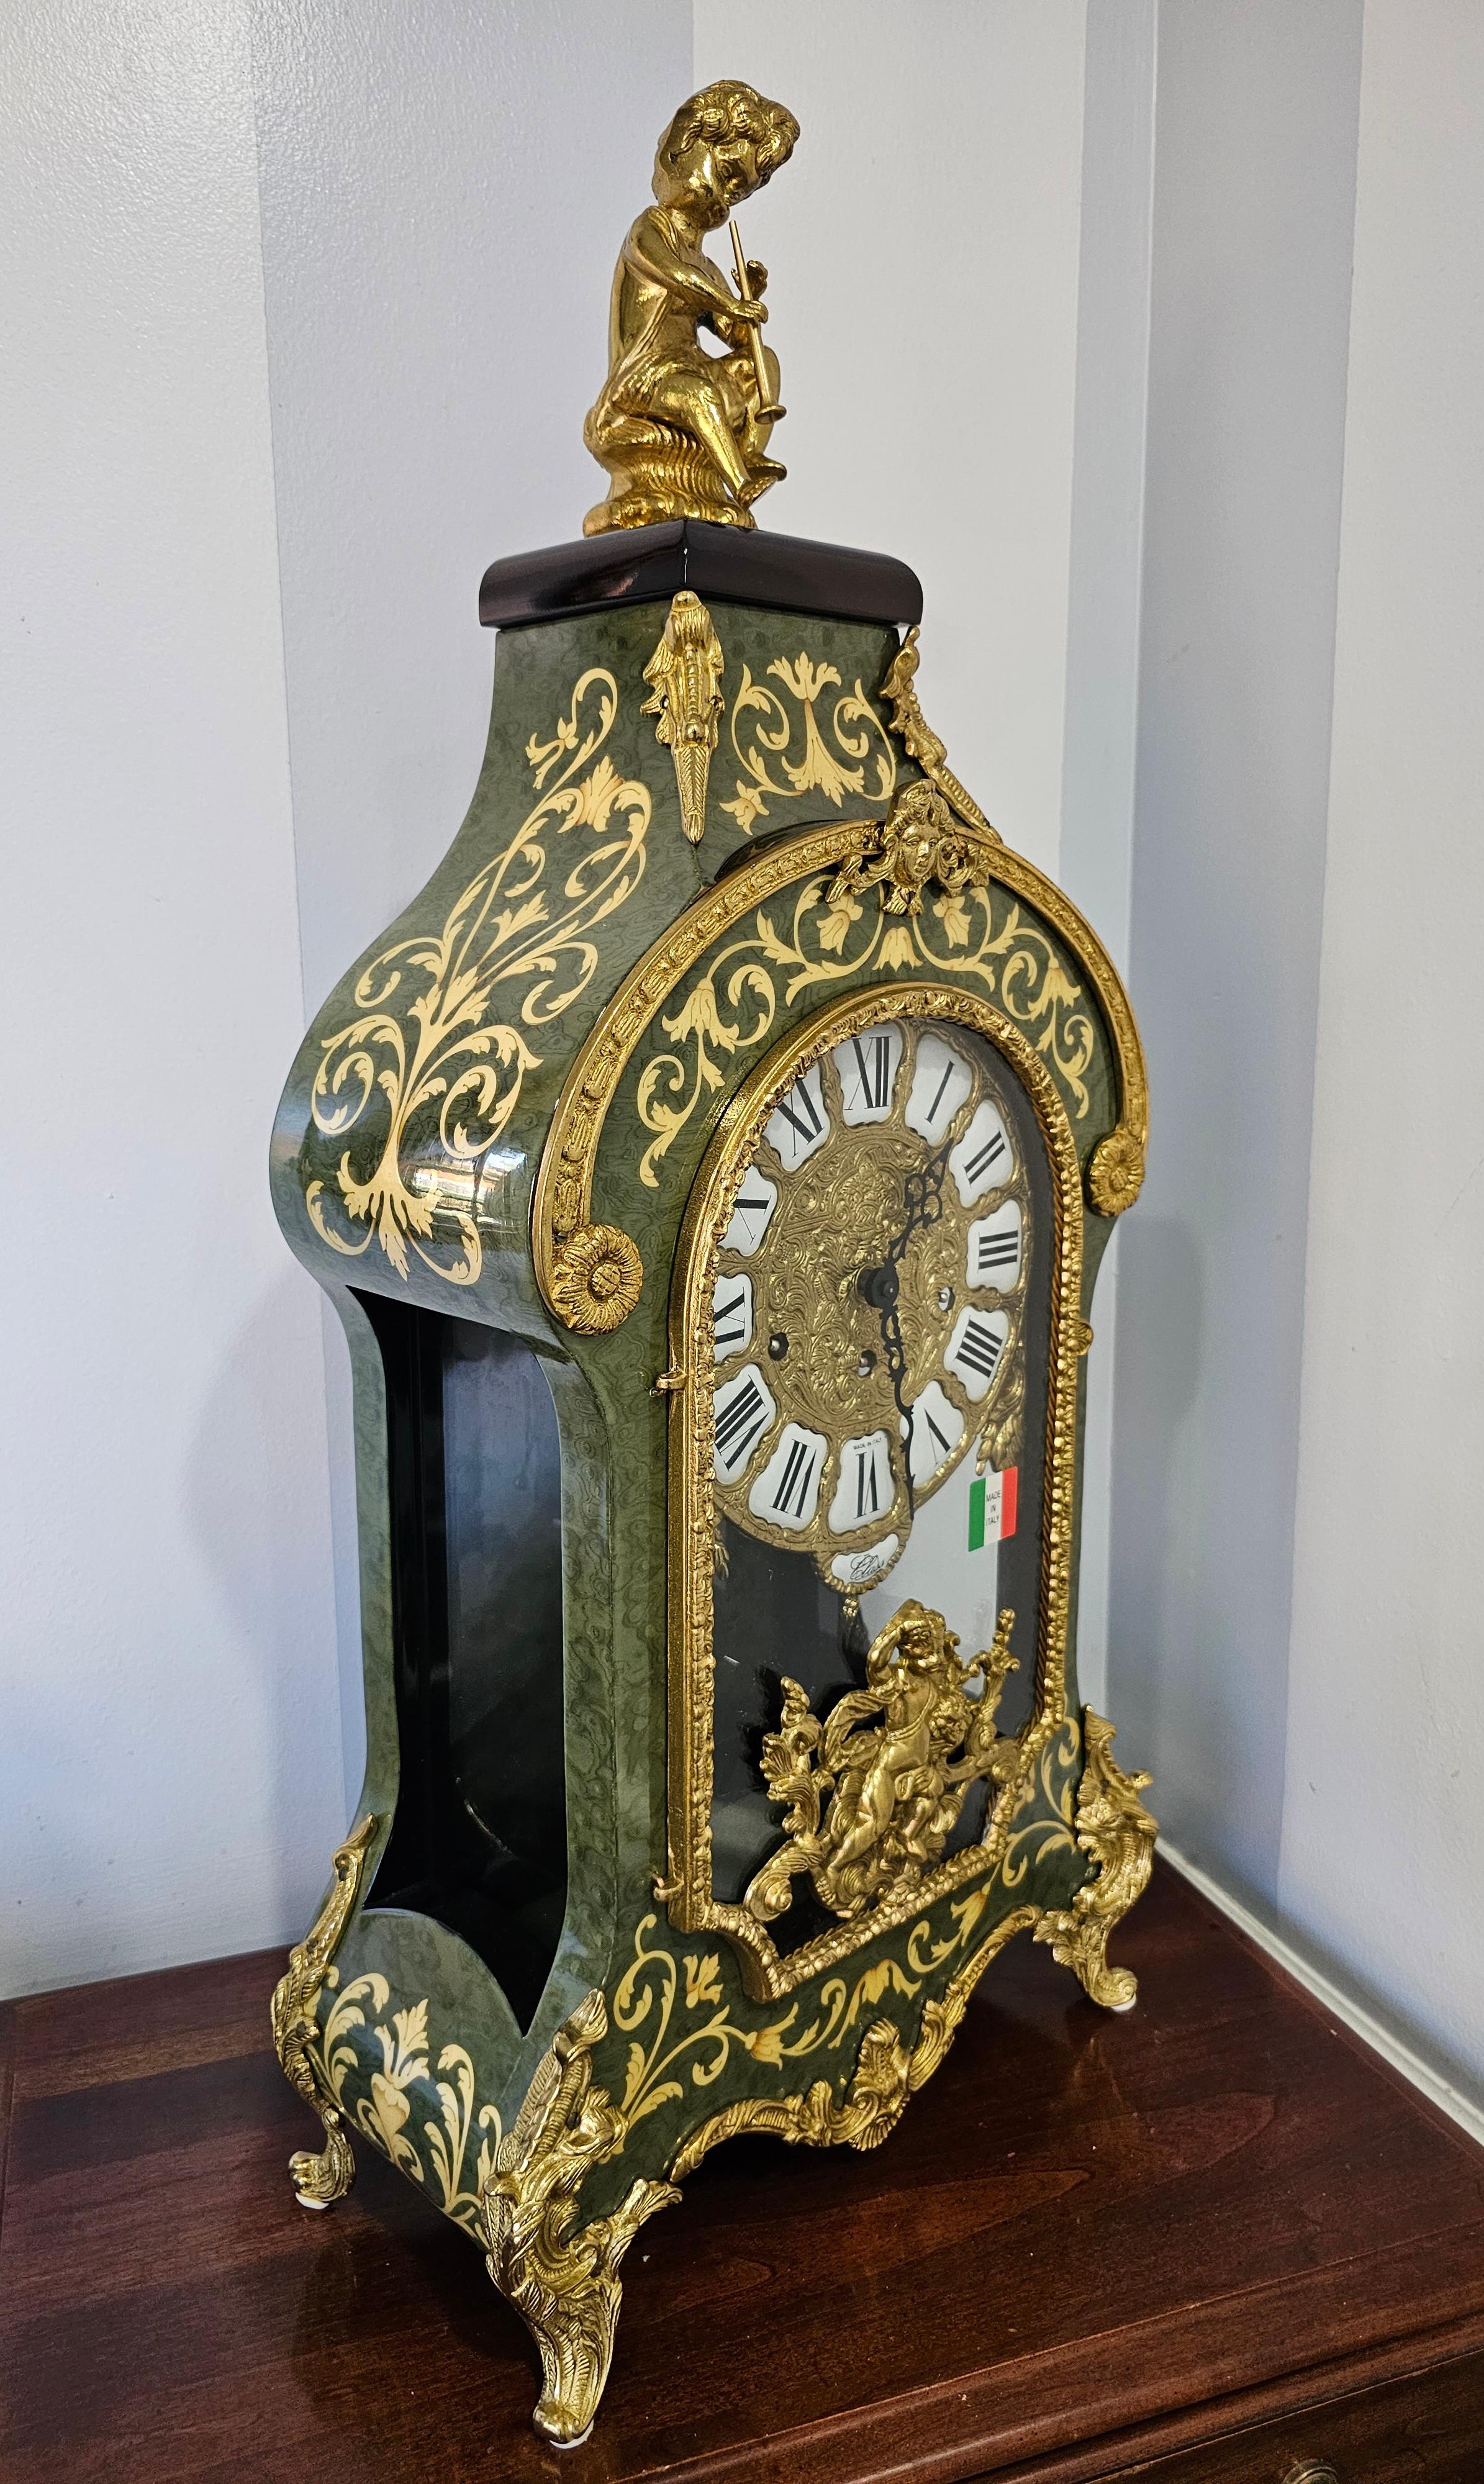 German New Franz Hermle Mantel Clock in DeArt Italian Fine Marquetry and Ormolu Case For Sale